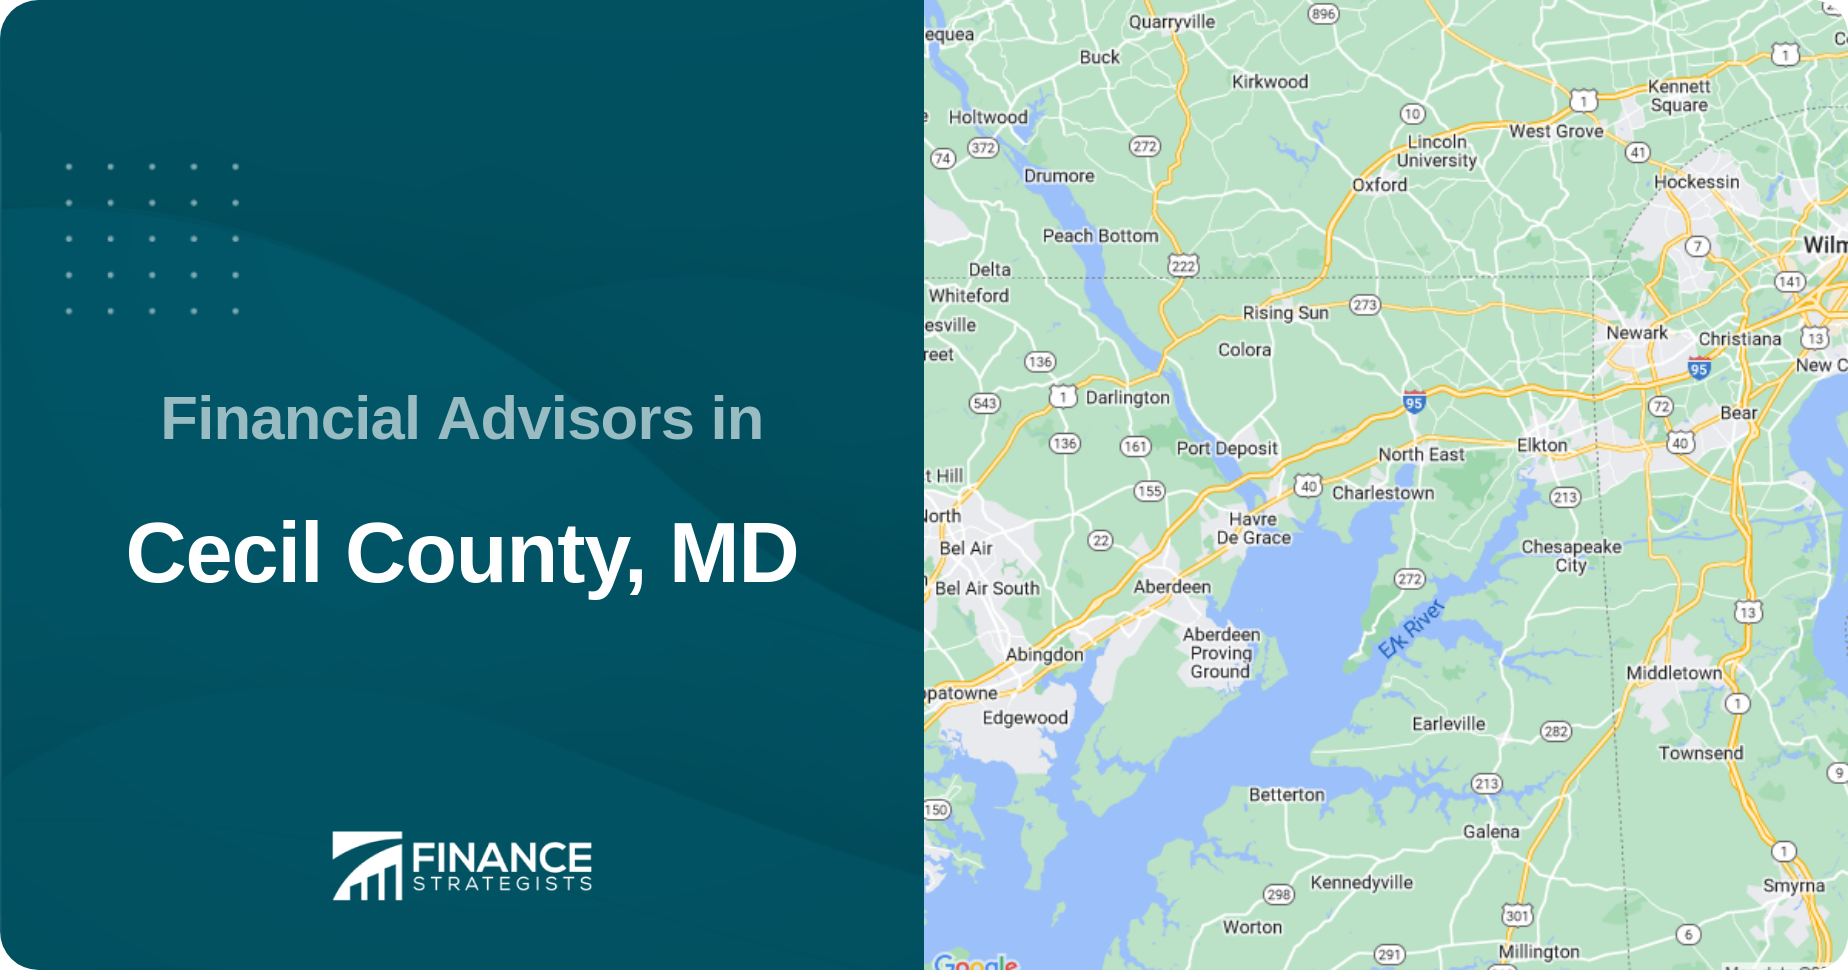 Financial Advisors in Cecil County, MD